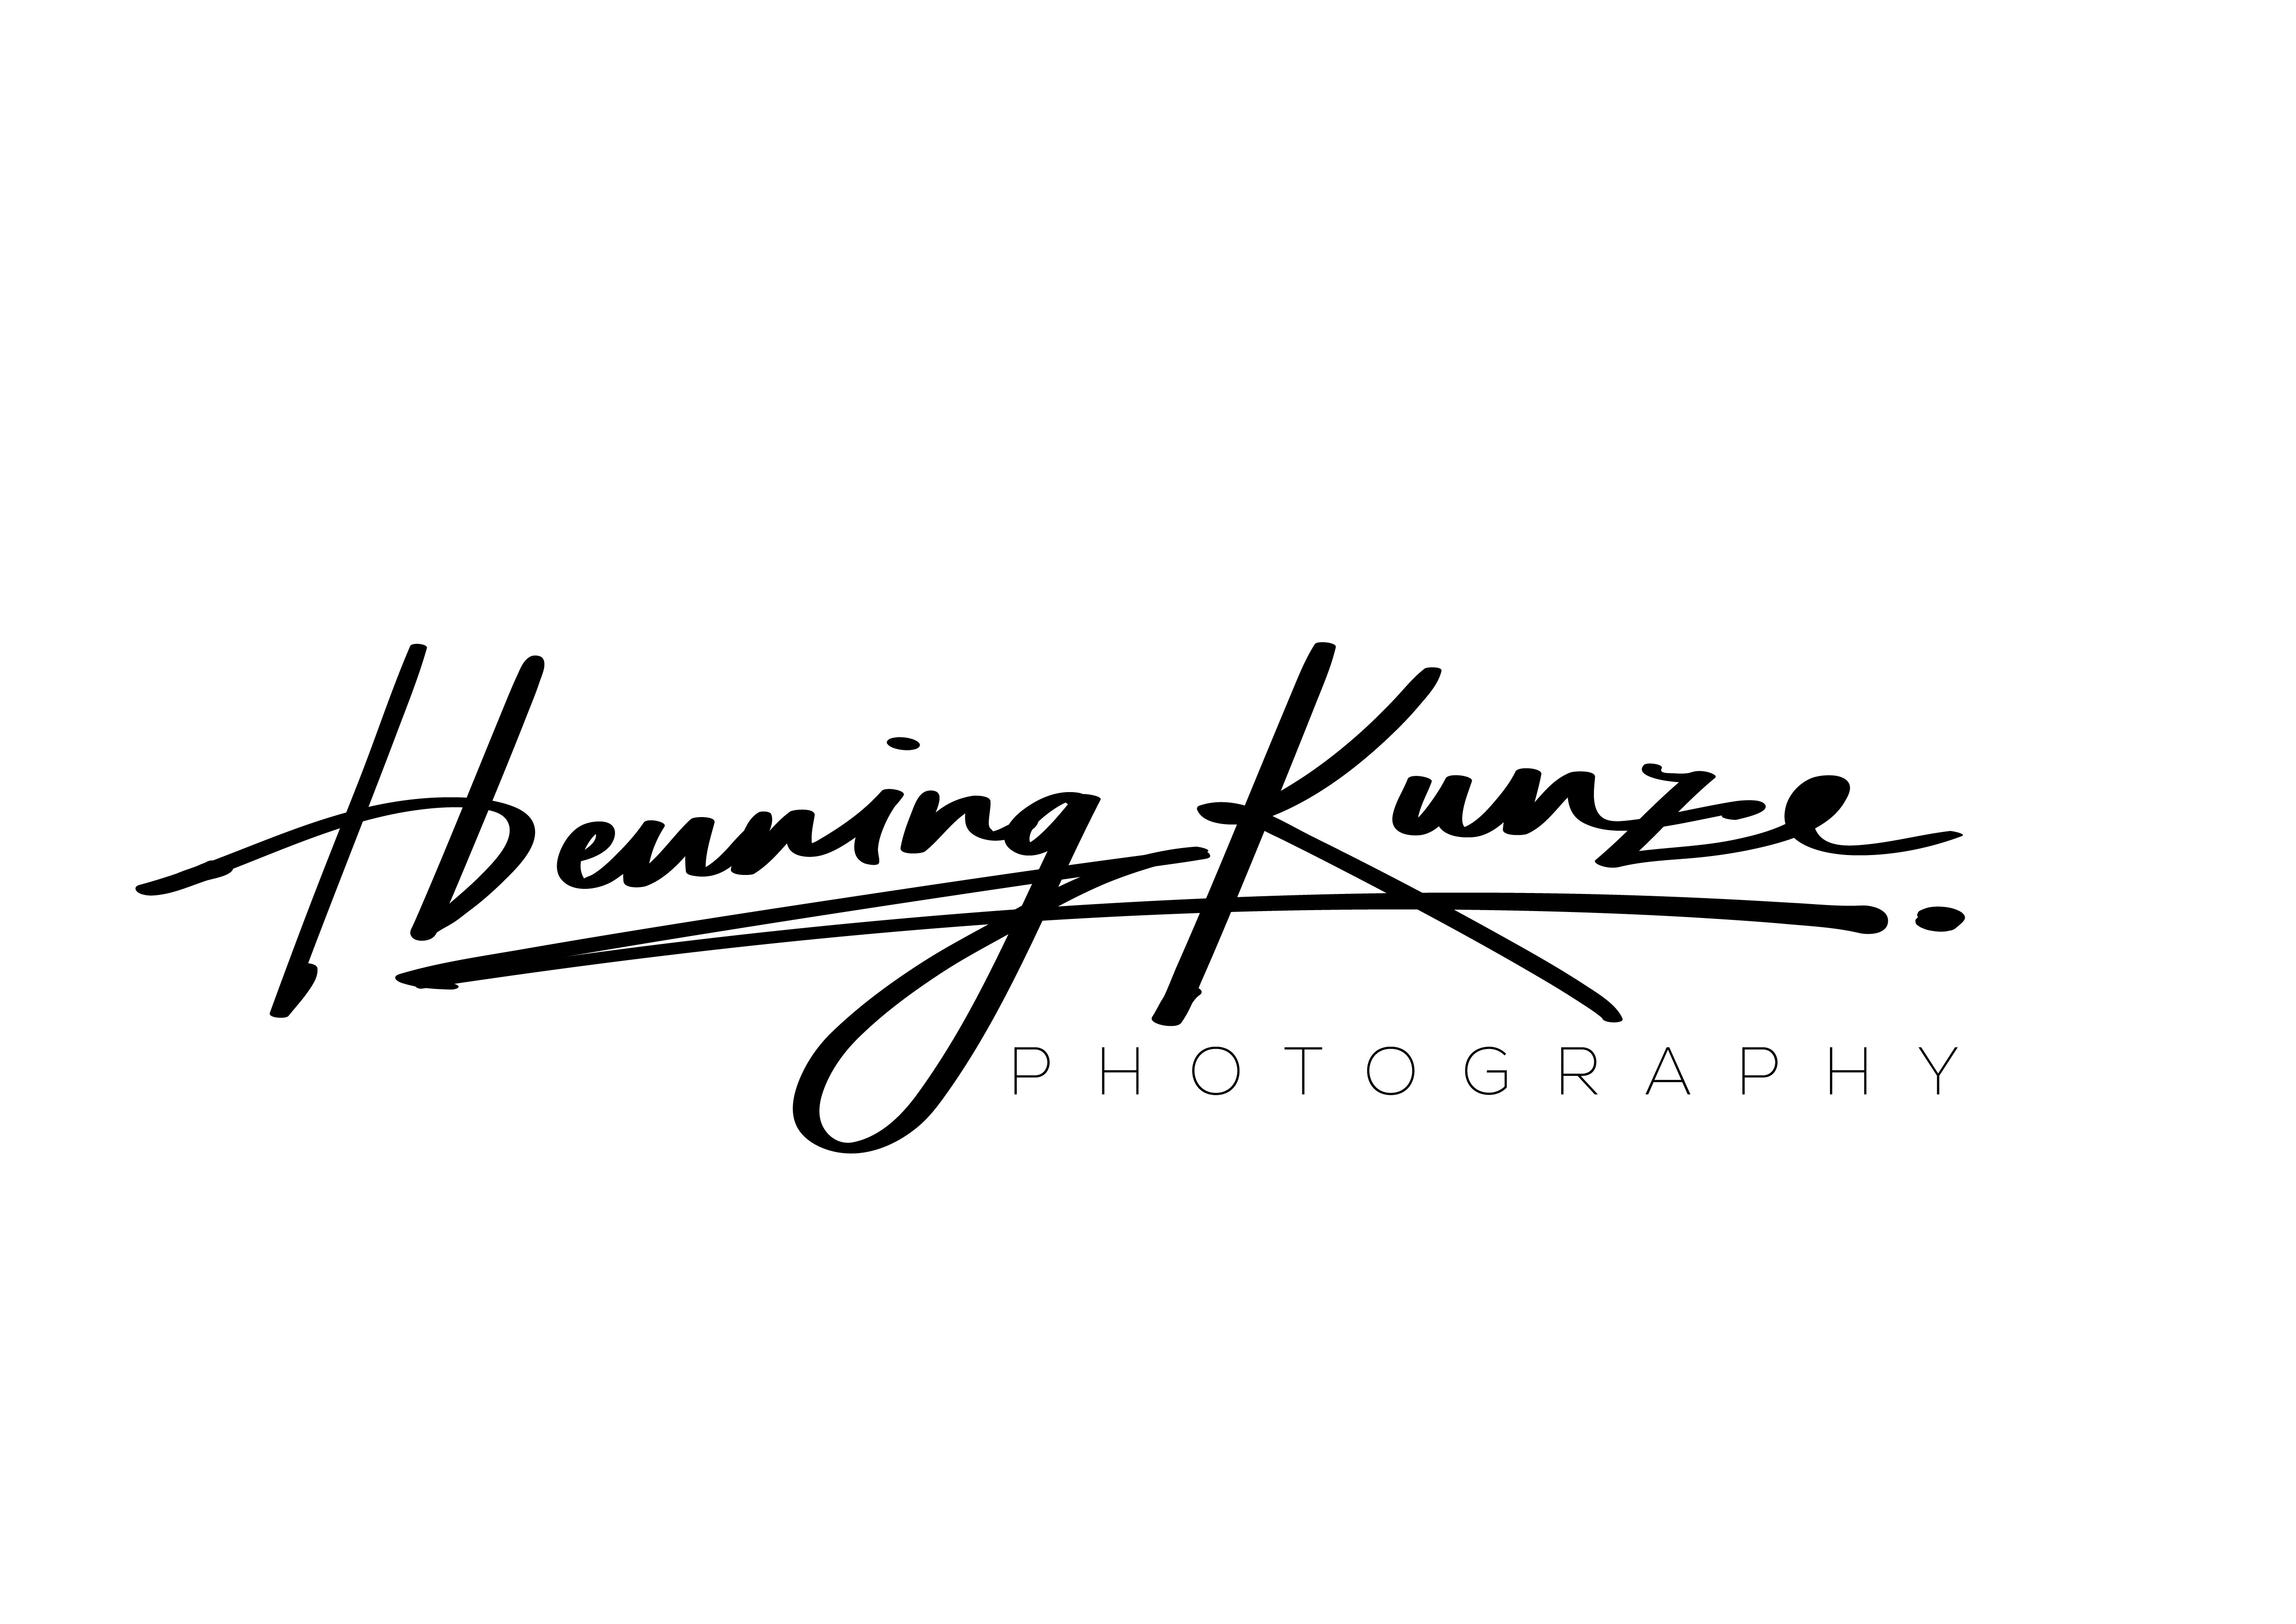 Henning Kunze Photography in Hannover